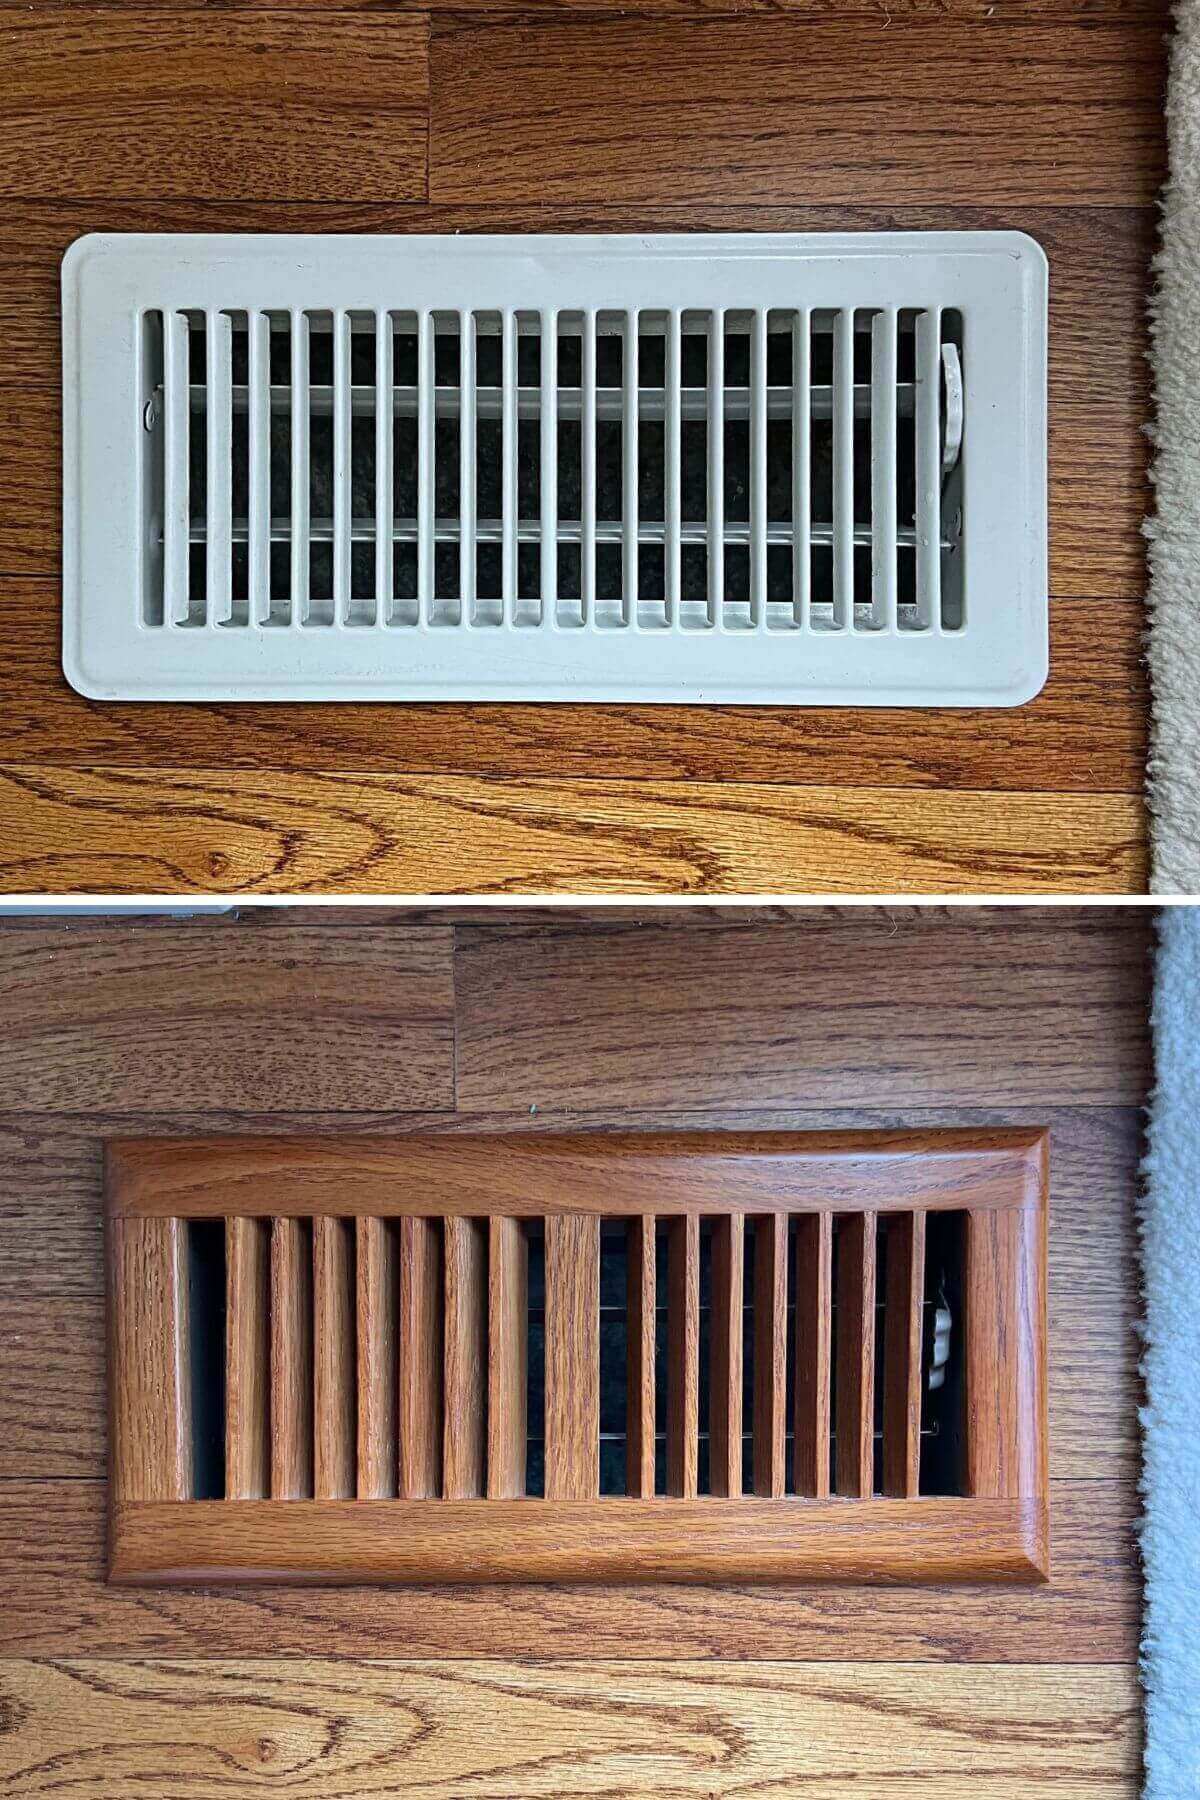 two images of wood floor with white floor vent and wood floor vent.